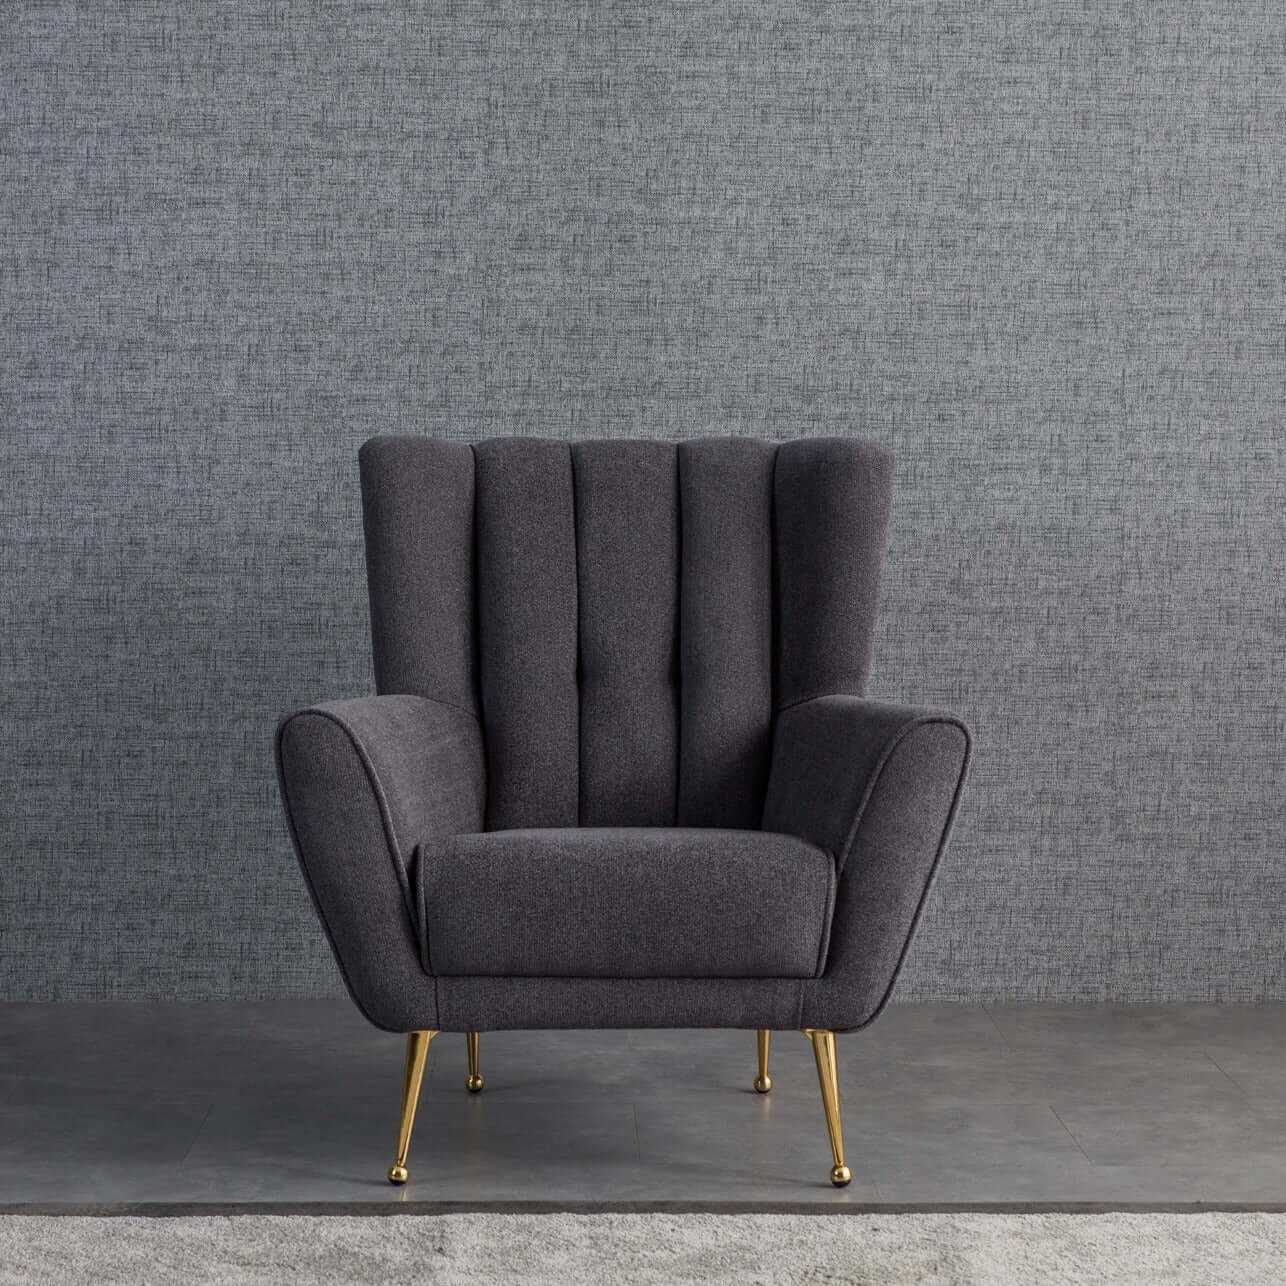 Ashcroft Furniture Co Lounge Chairs Dark Grey Gianna Mid-Century Modern Tufted French Boucle Armchair